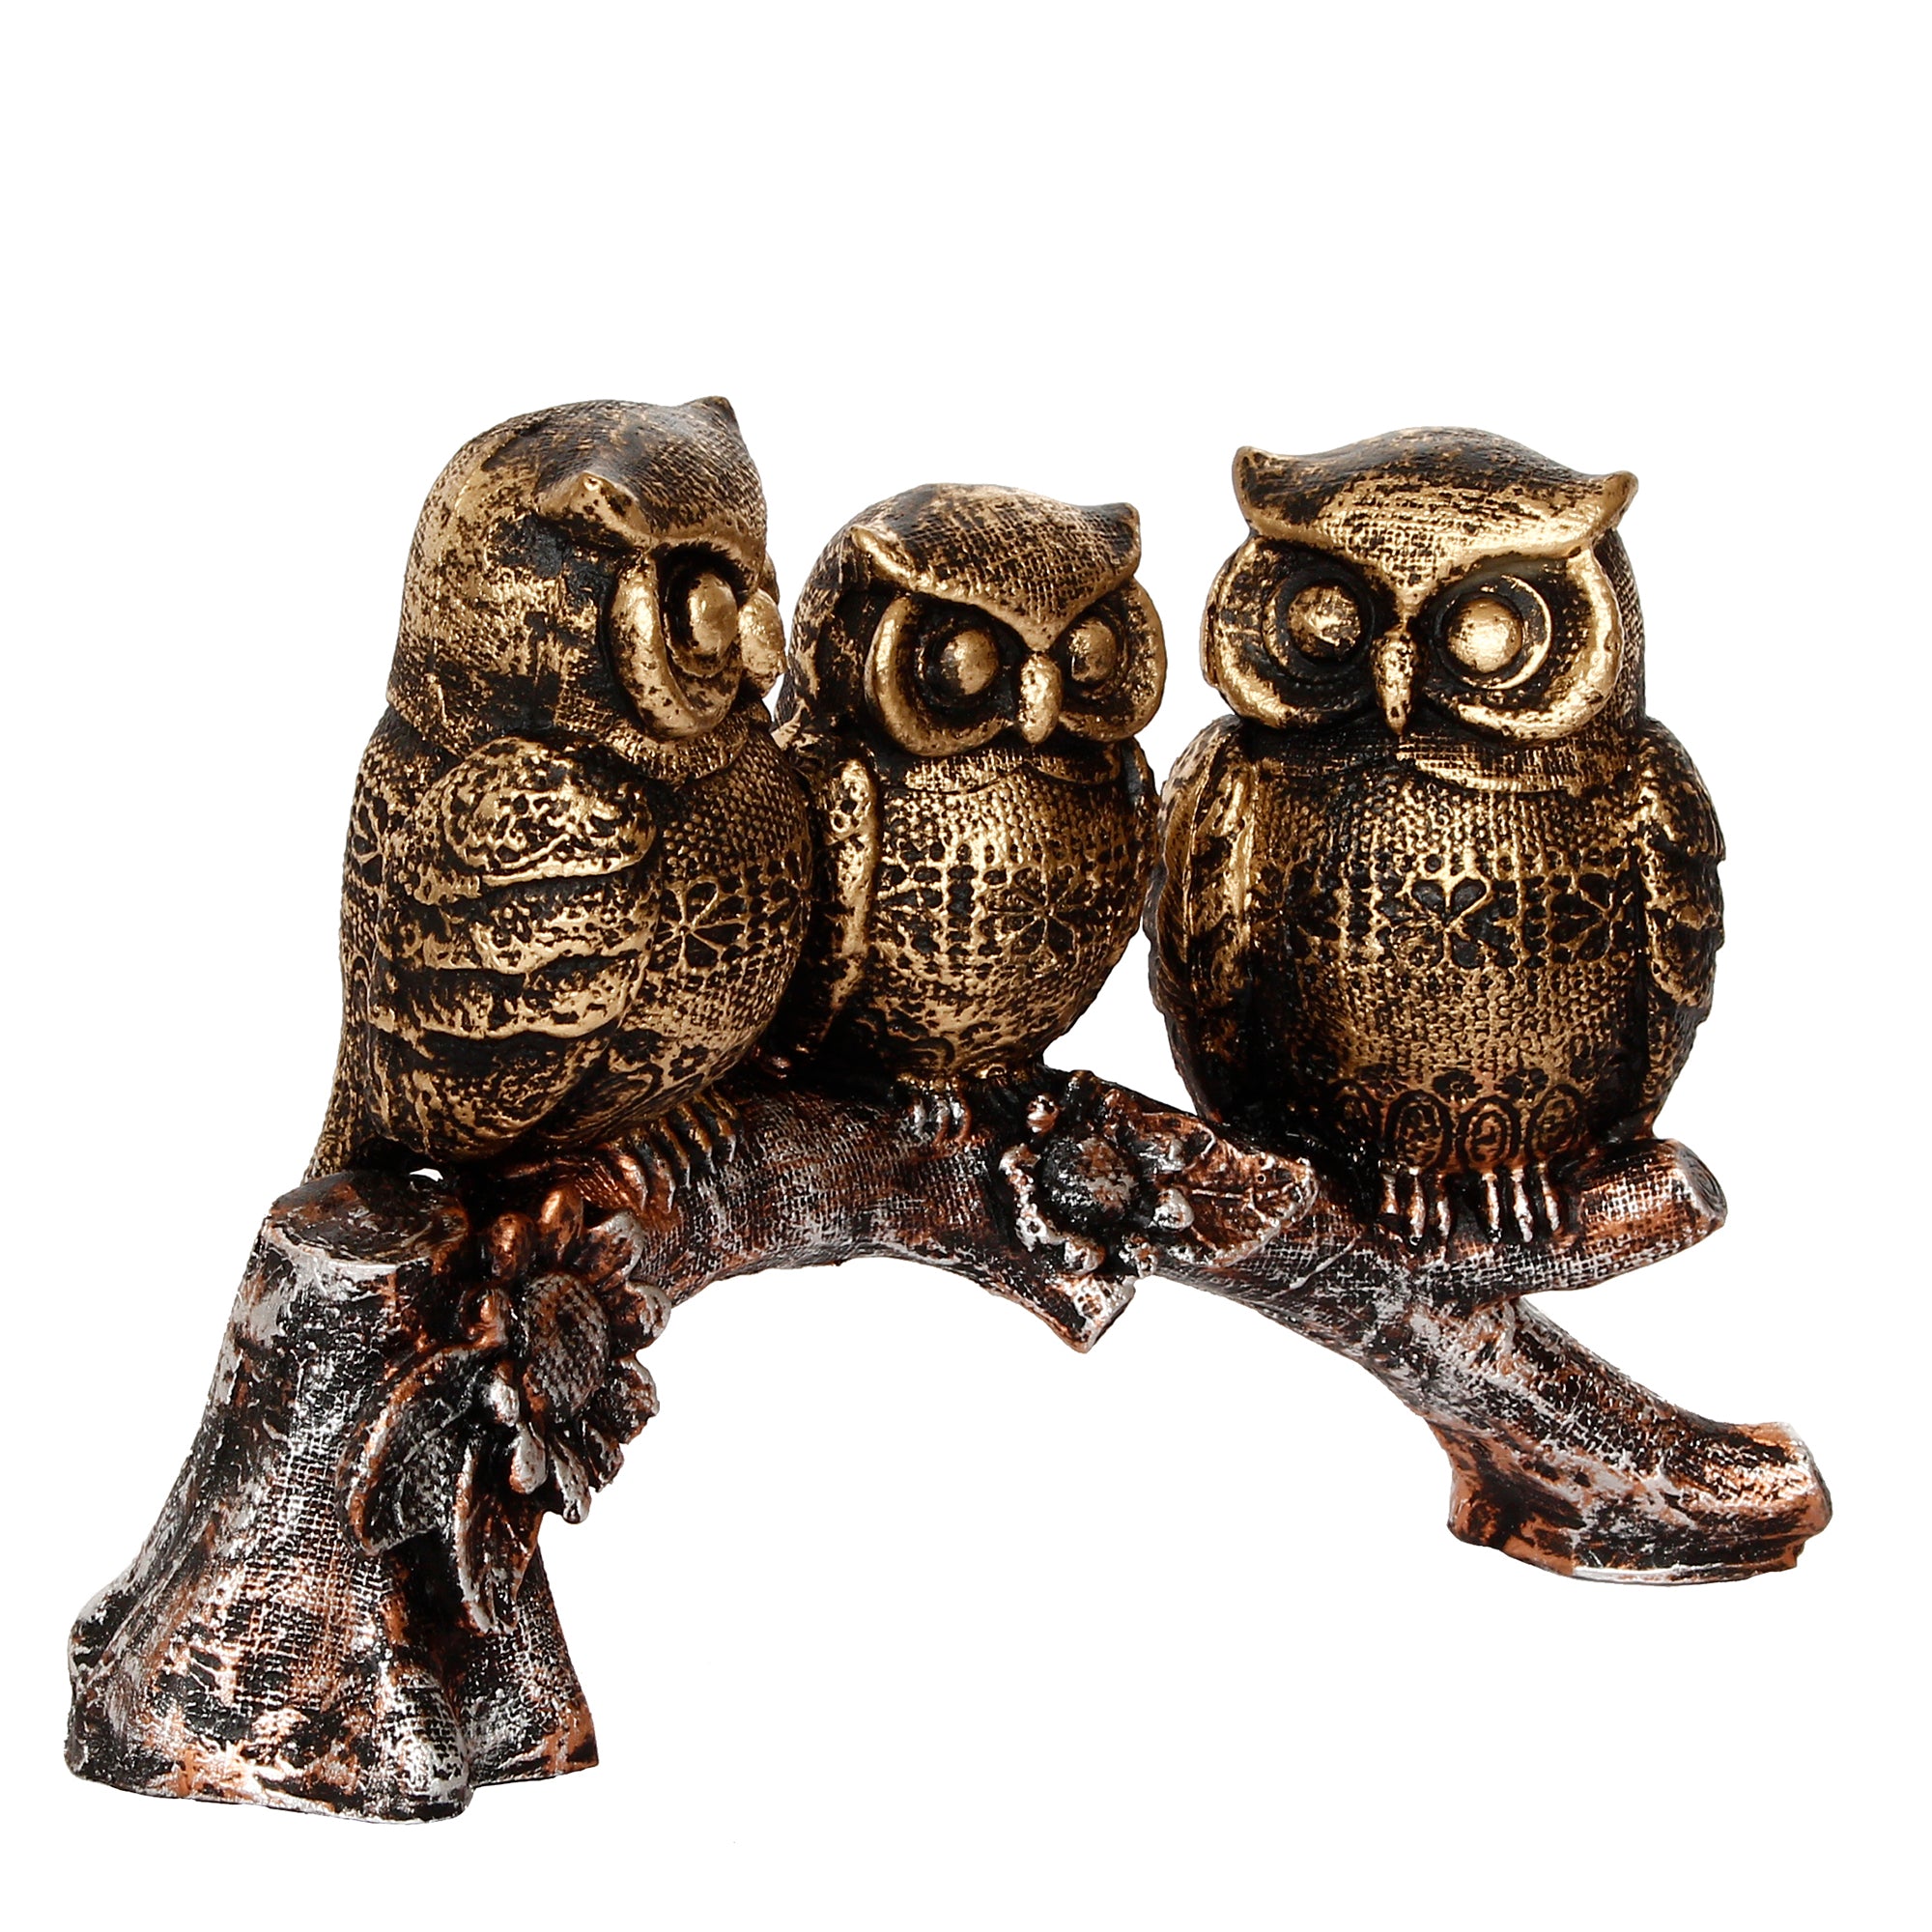 3 Owl Sitting on Branch Antique Finish Handcrafted Polyresin Decorative Showpiece 5